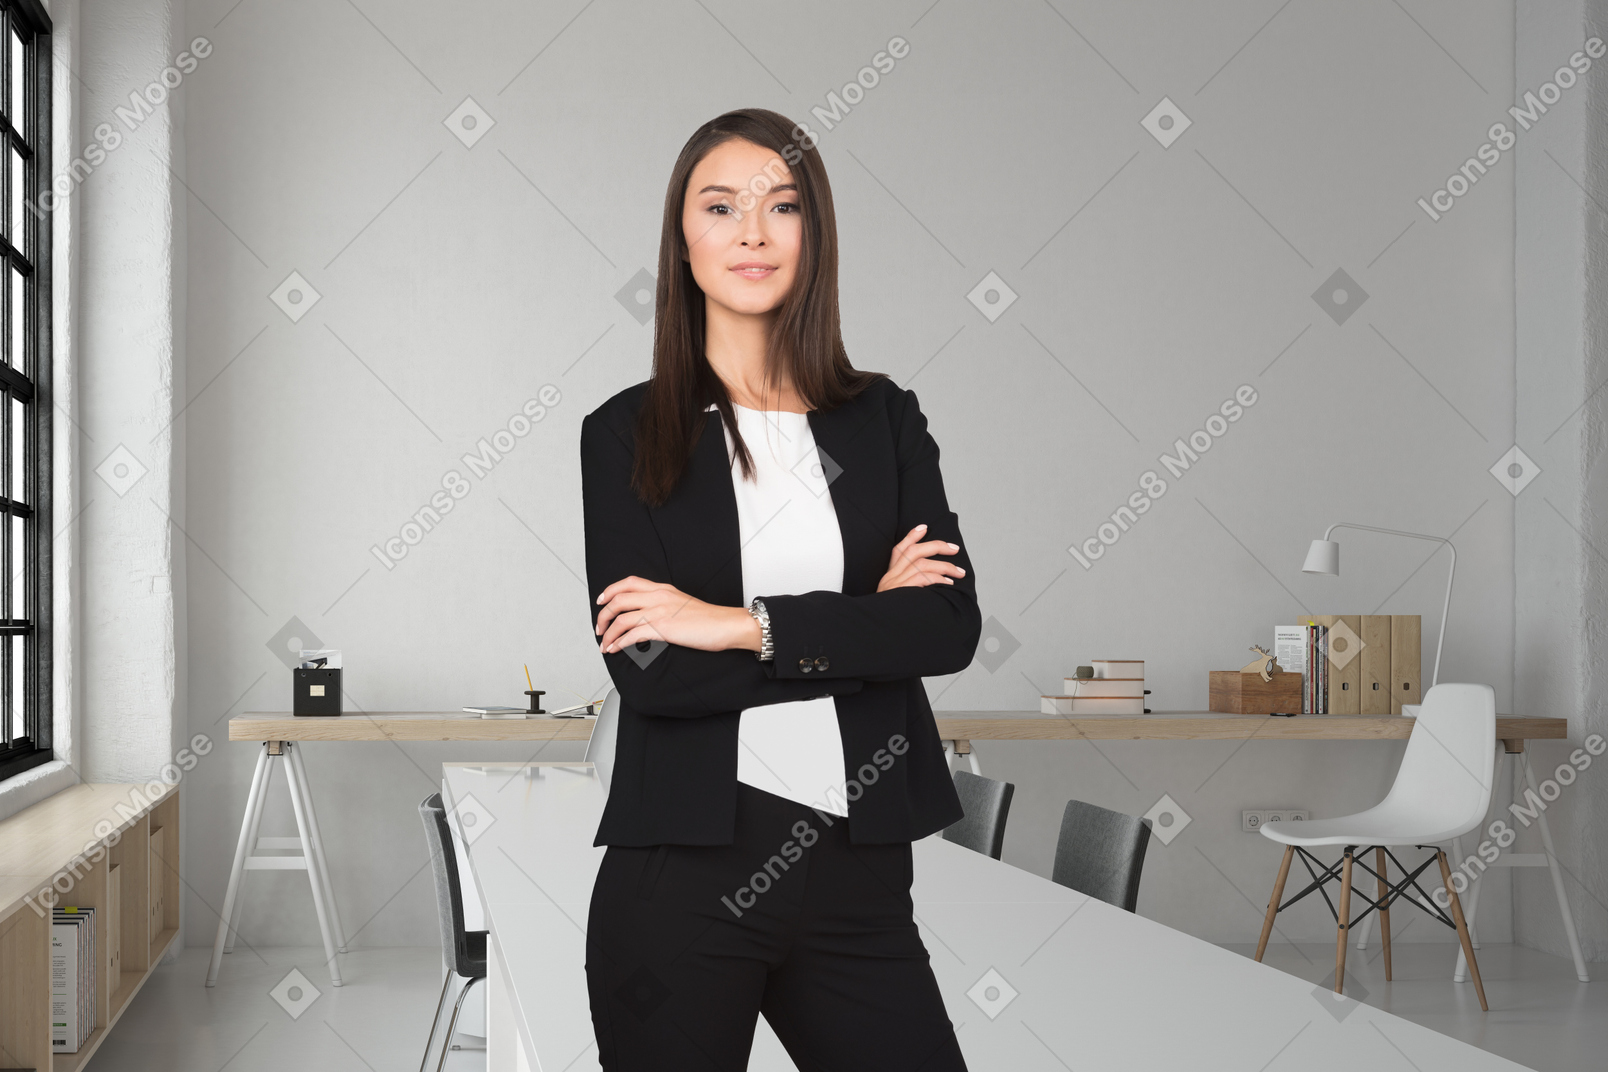 A business woman standing with her arms crossed in front of an empty office